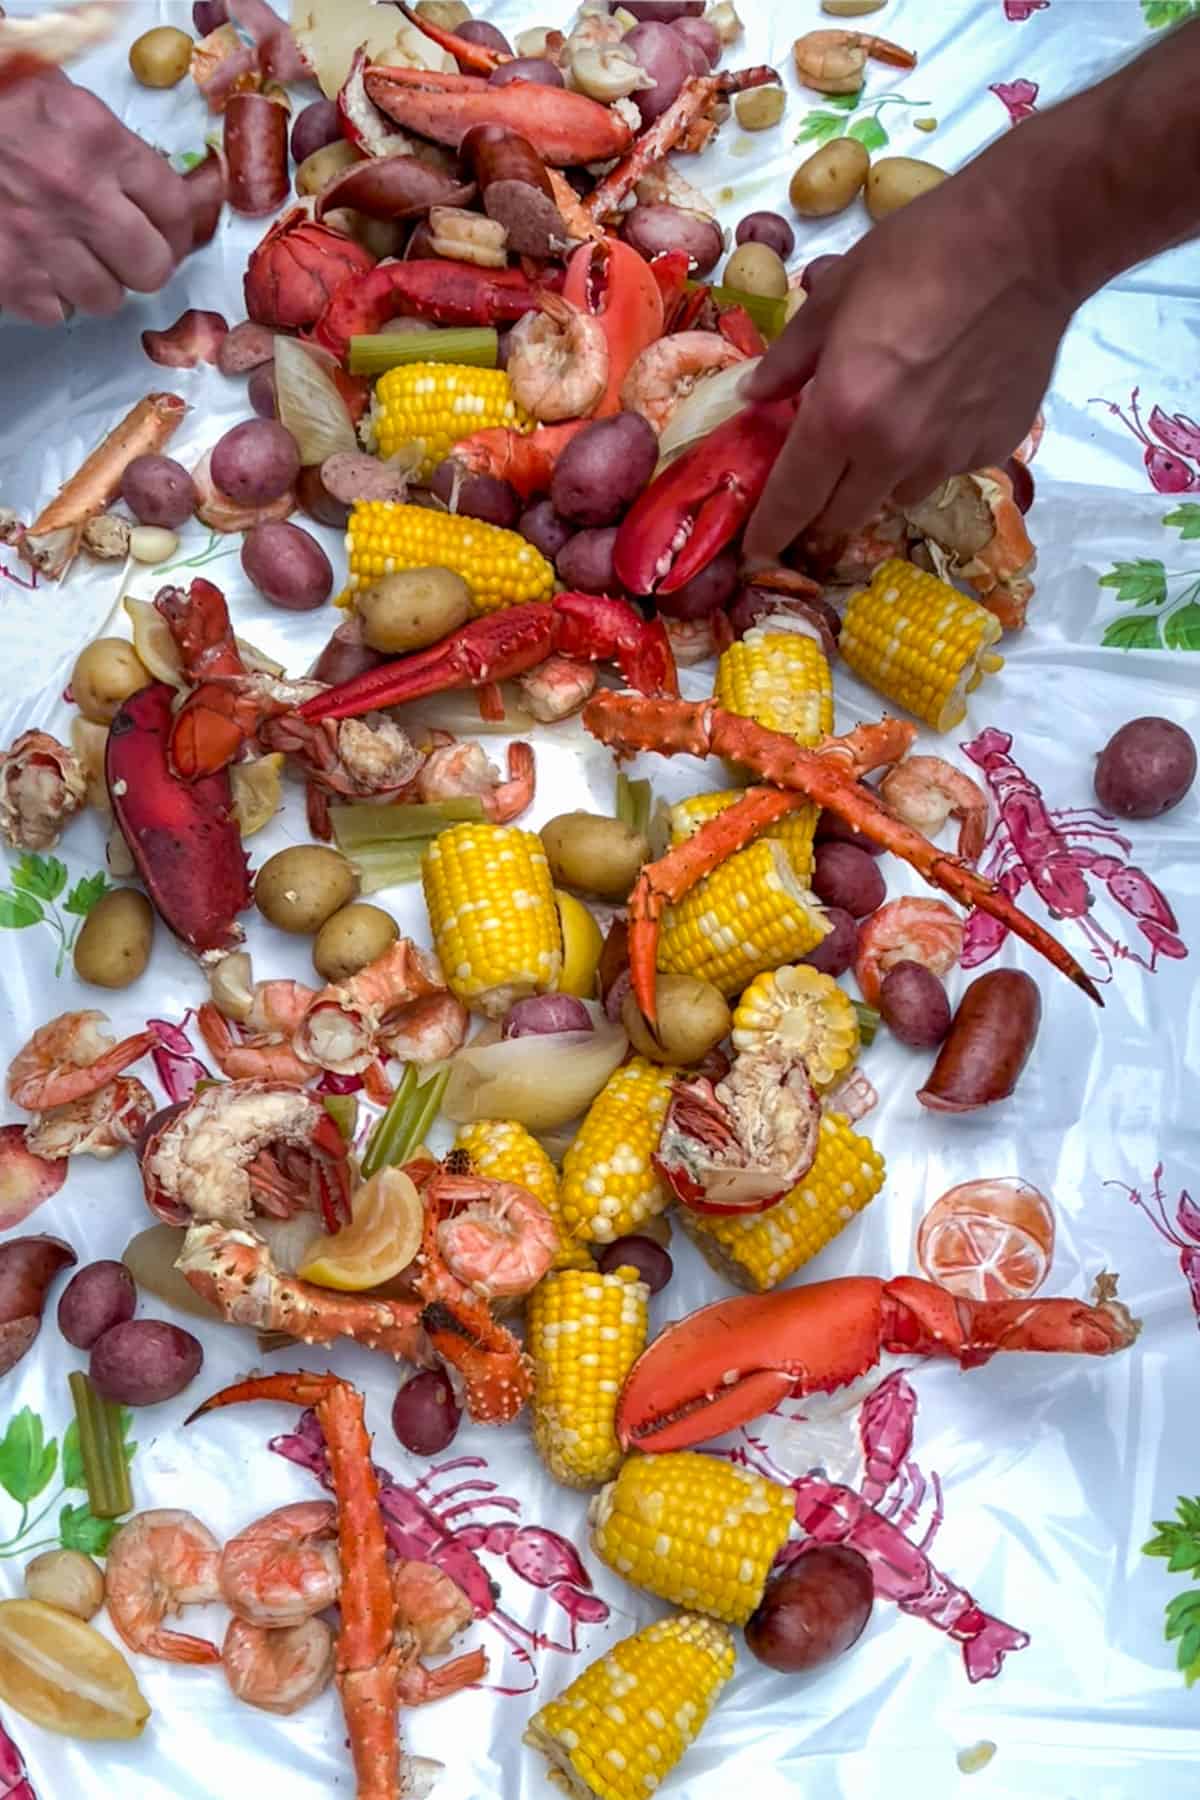 Hands reaching in to grab seafood from a table topped with a seafood boil that has lobster, crab legs, corn, potatoes, and shrimp